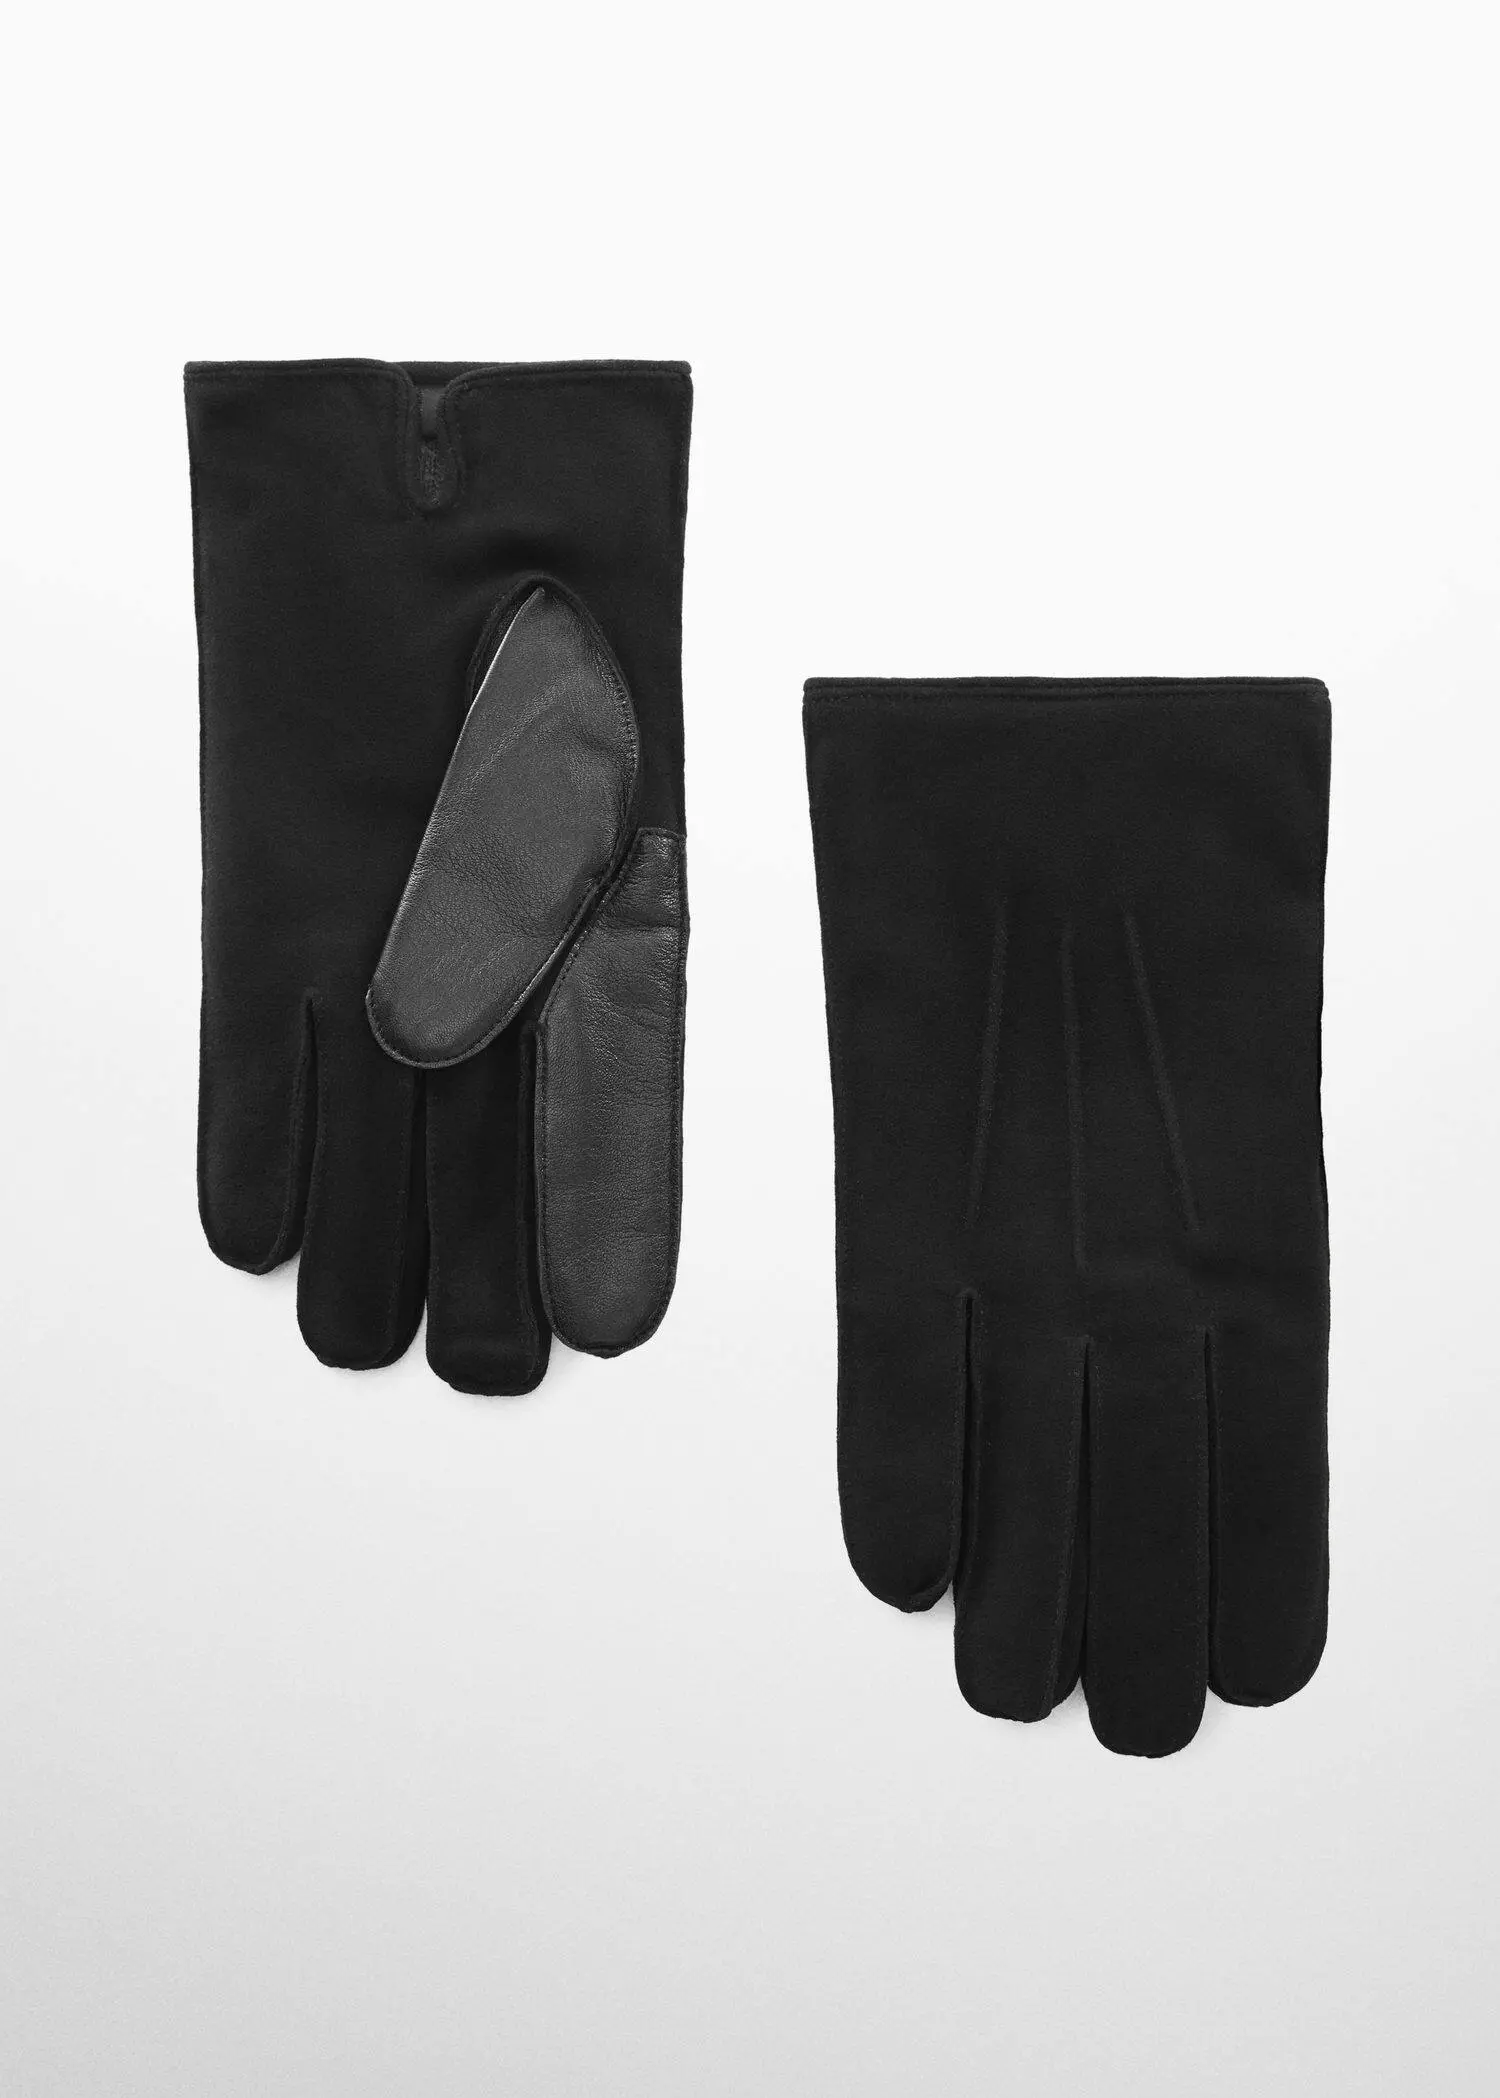 Mango Suede leather gloves with wool lining. 3